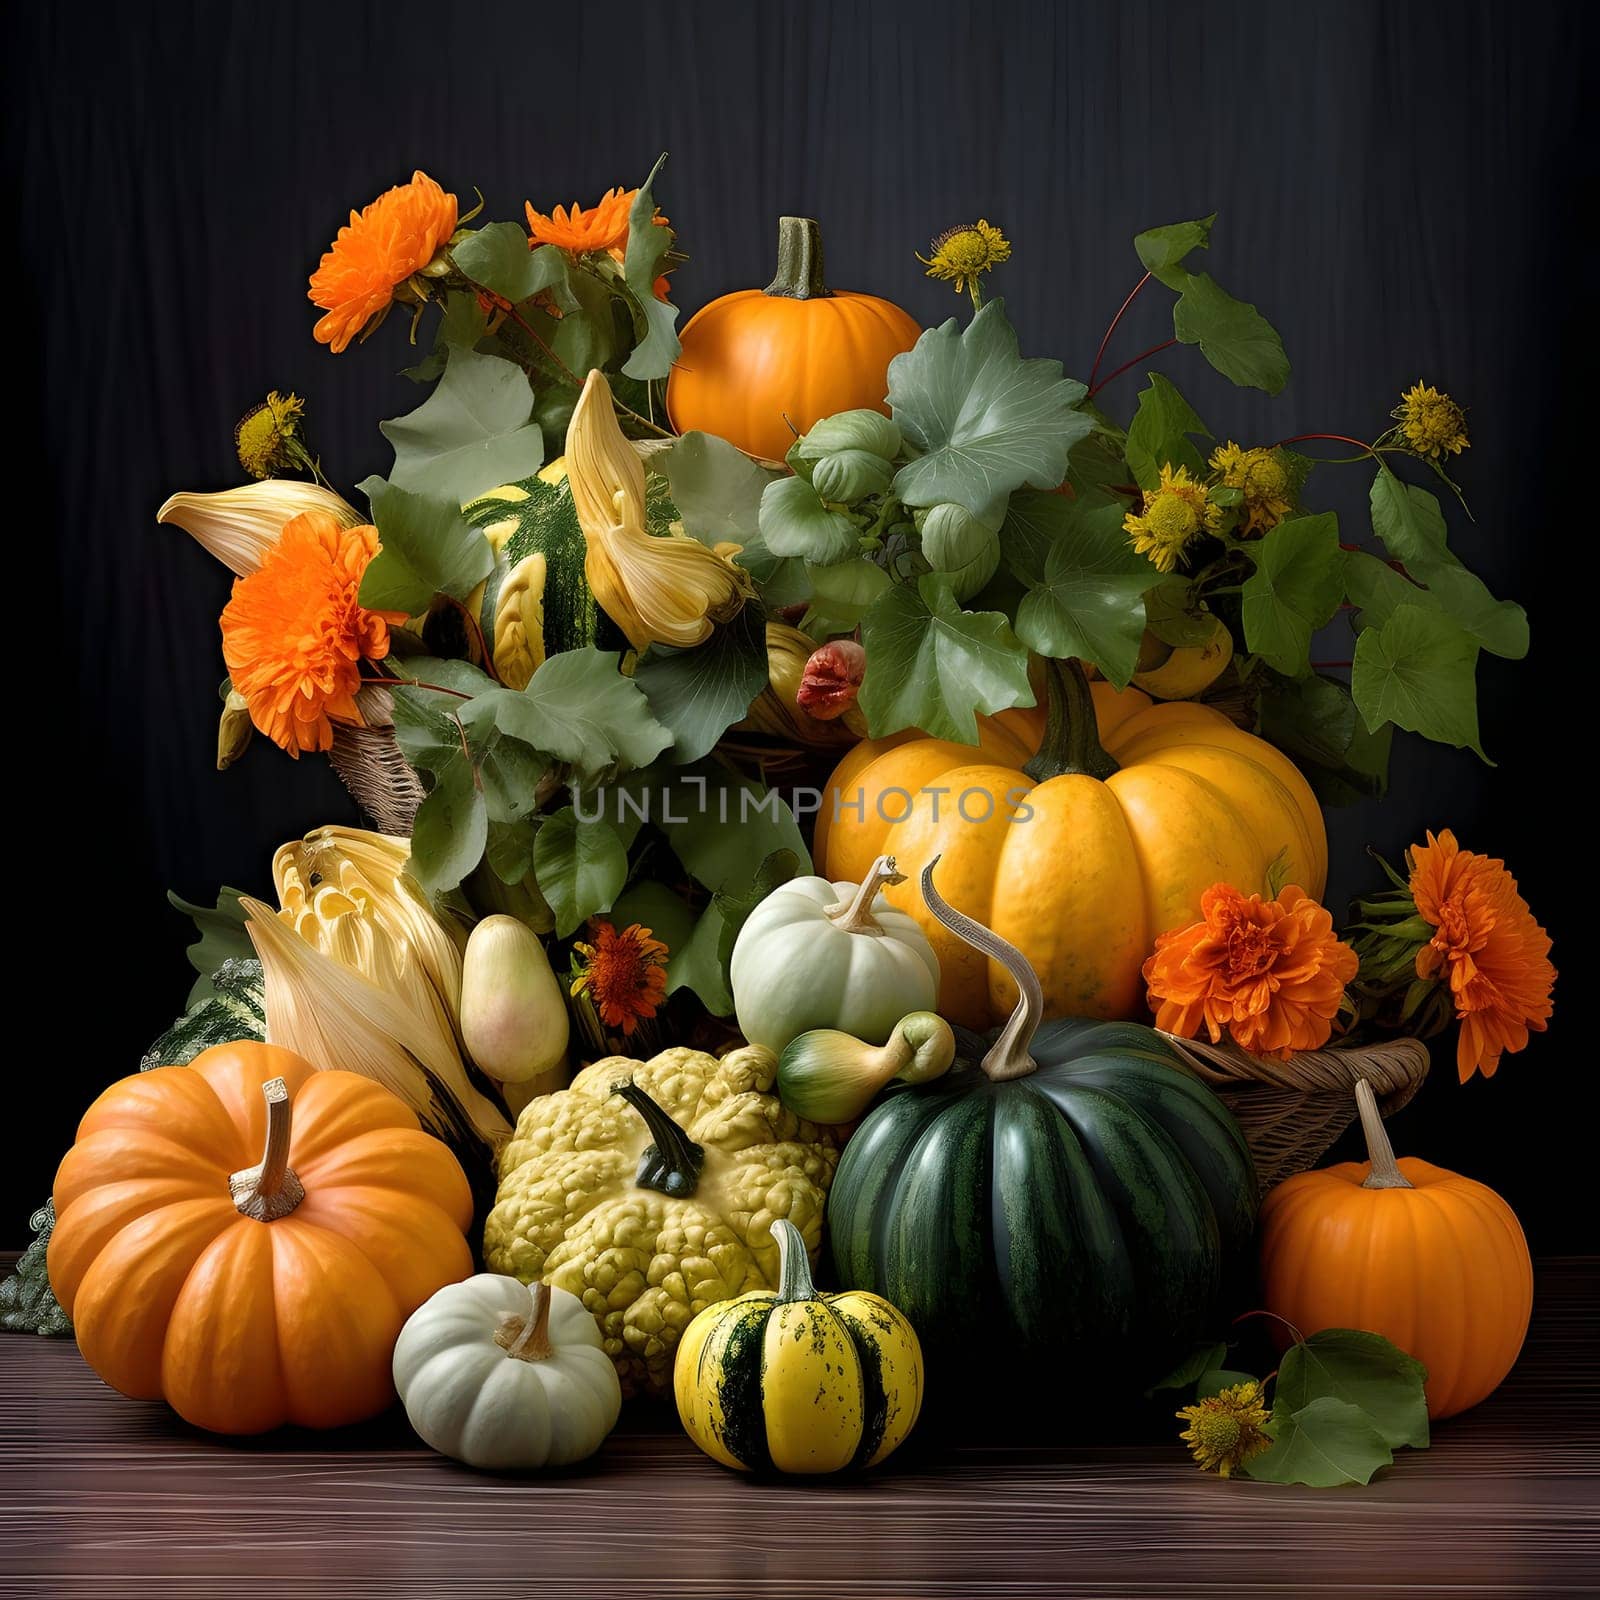 Elegantly arranged pumpkins and other vegetables on a dark background. Pumpkin as a dish of thanksgiving for the harvest. by ThemesS